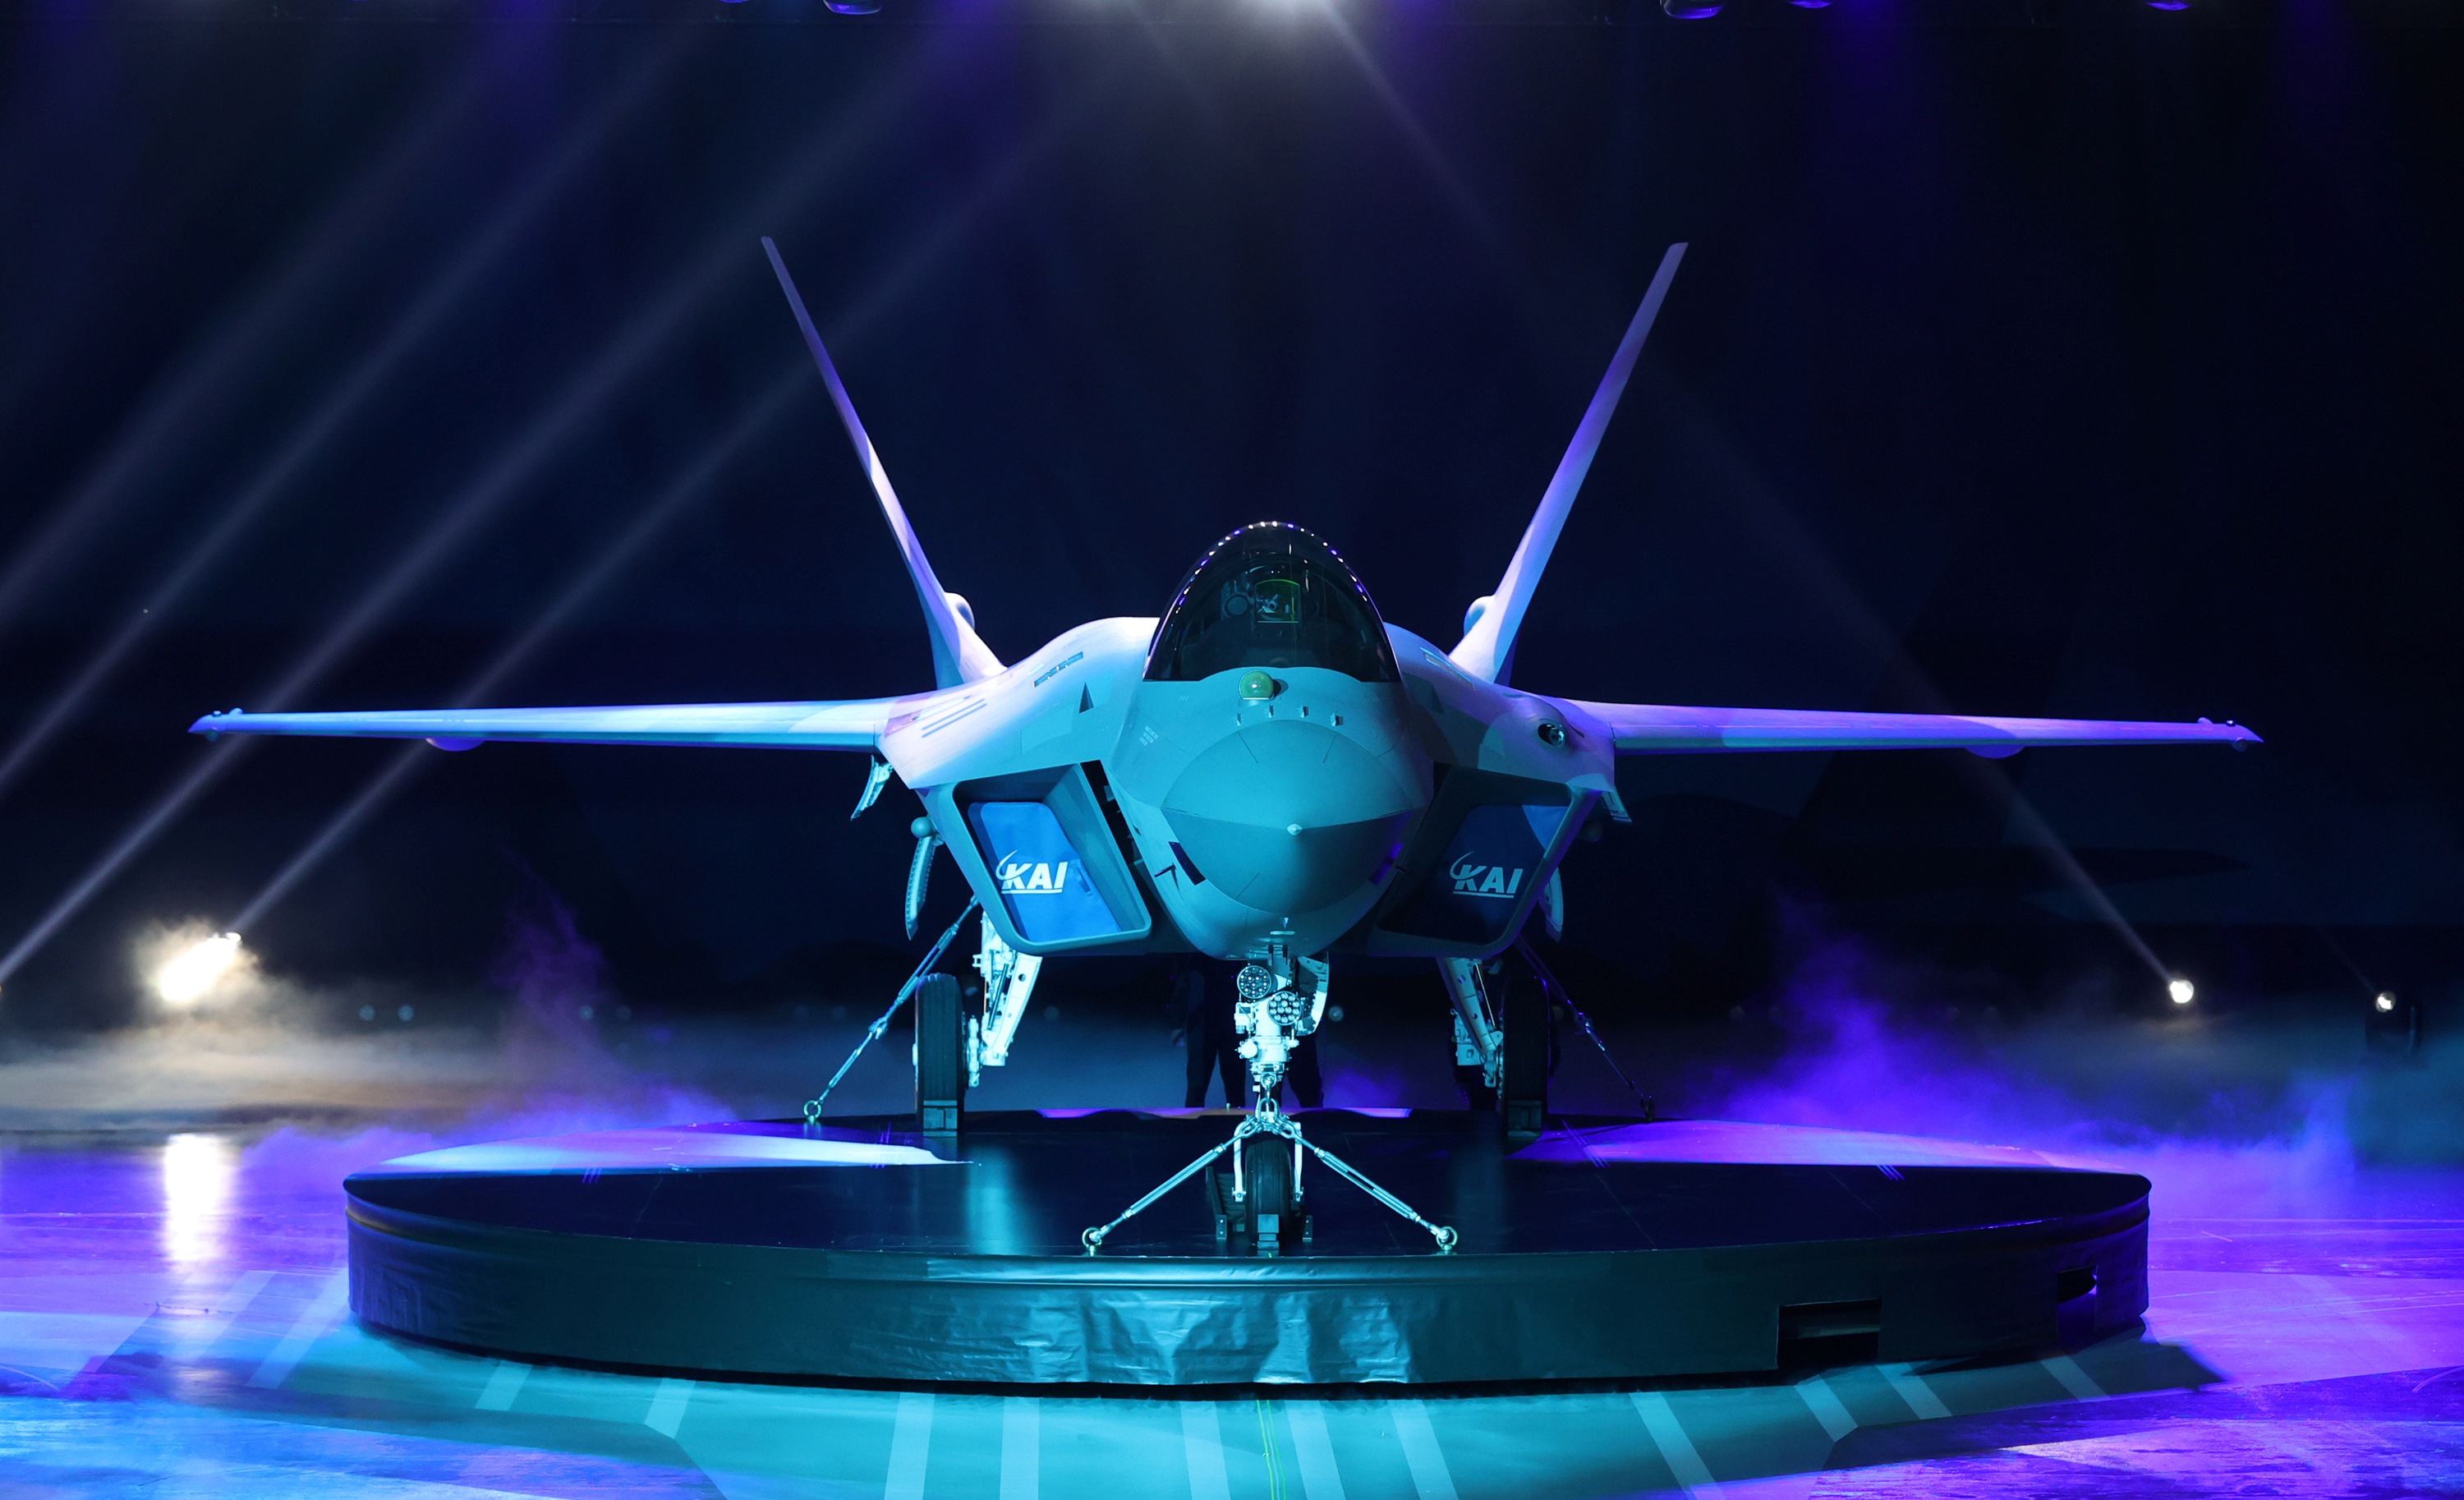 The country's first homegrown fighter jet called KF-21 is unveiled during its rollout ceremony in Sacheon